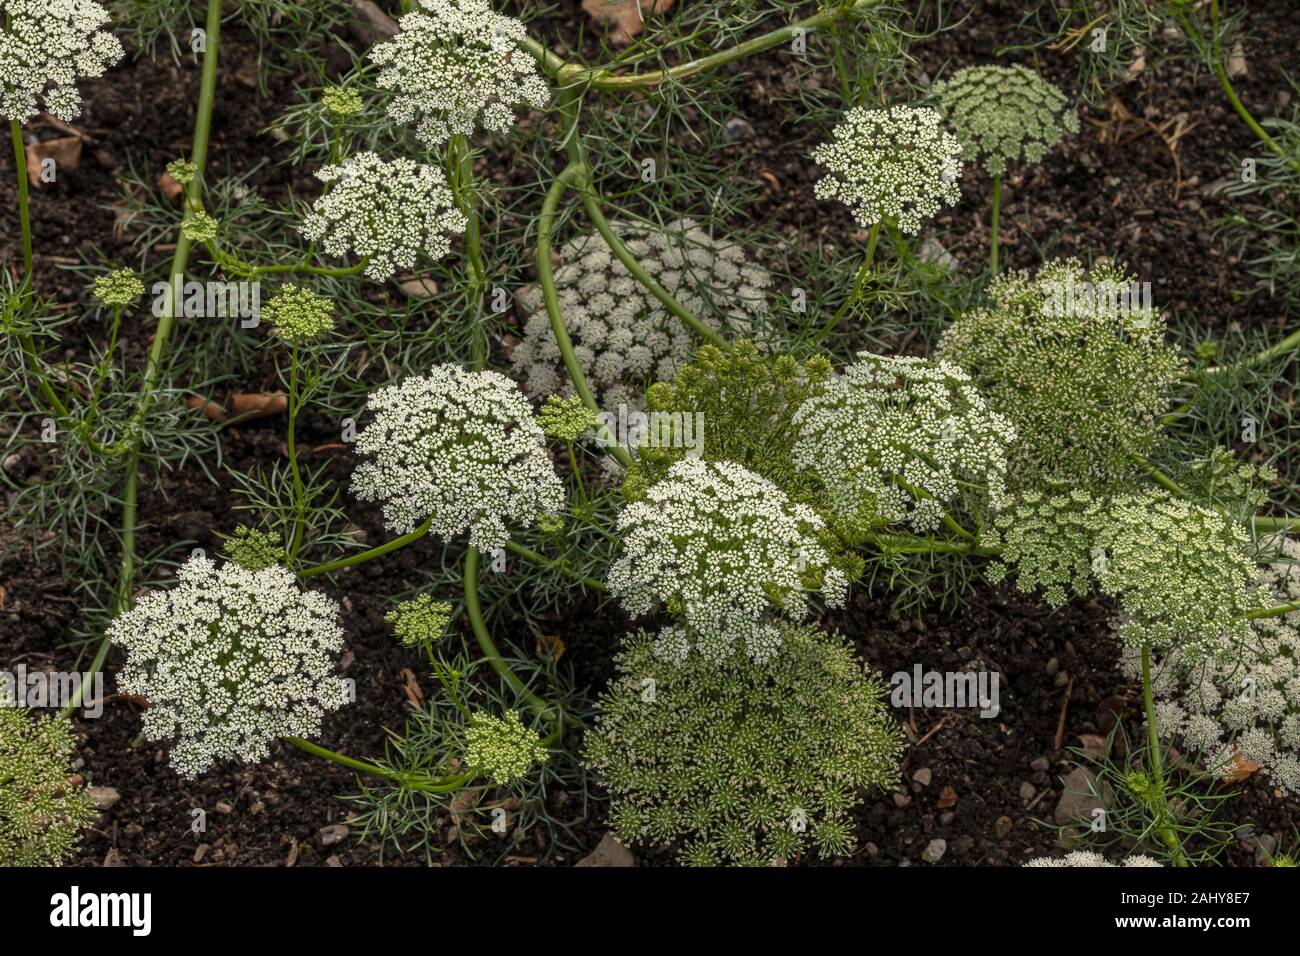 toothpick-plant, Ammi visnagi 'white', in flower and fruit. Stock Photo